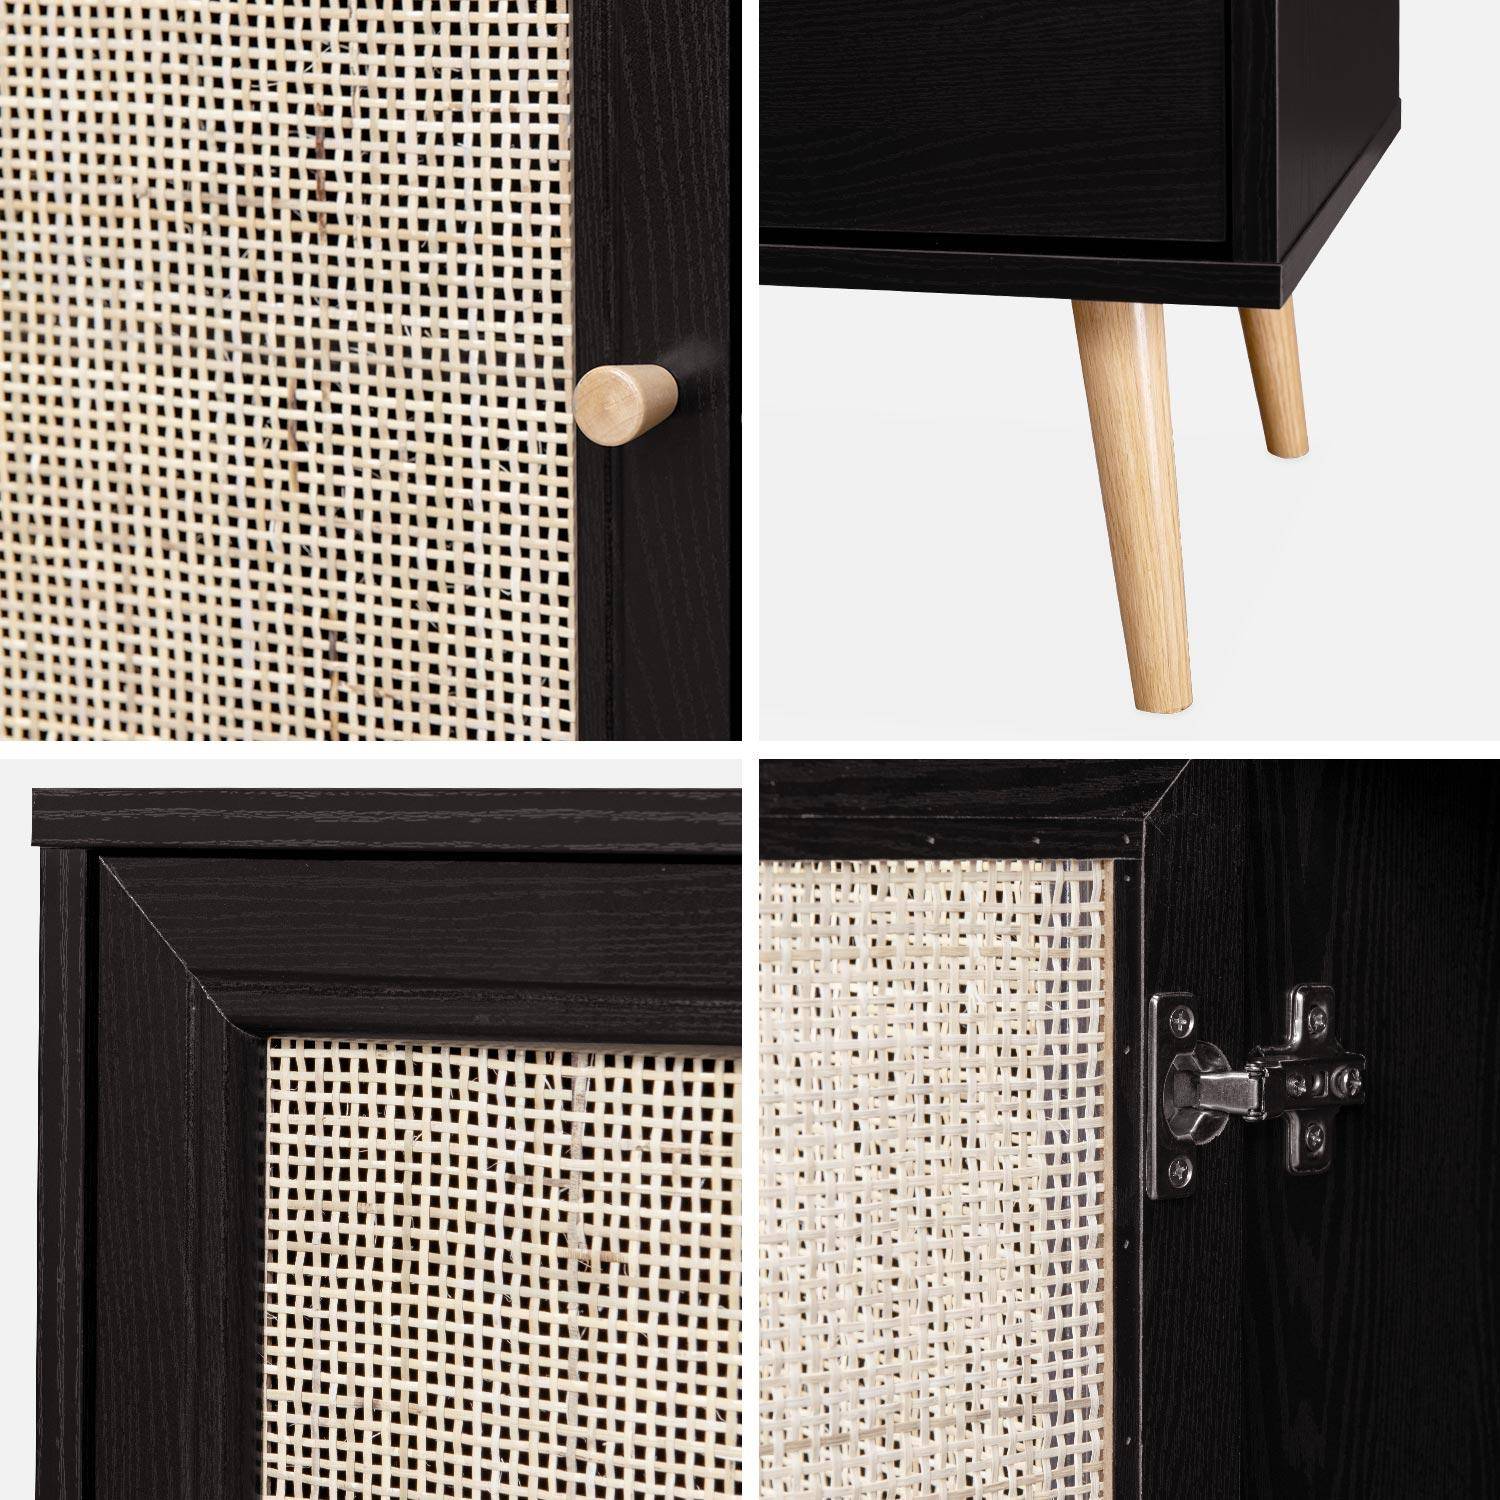 Wooden and cane rattan detail storage cabinet with 2 shelves, 1 cupboard, Scandi-style legs, 80x39x65.8cm - Boheme - Black Photo5